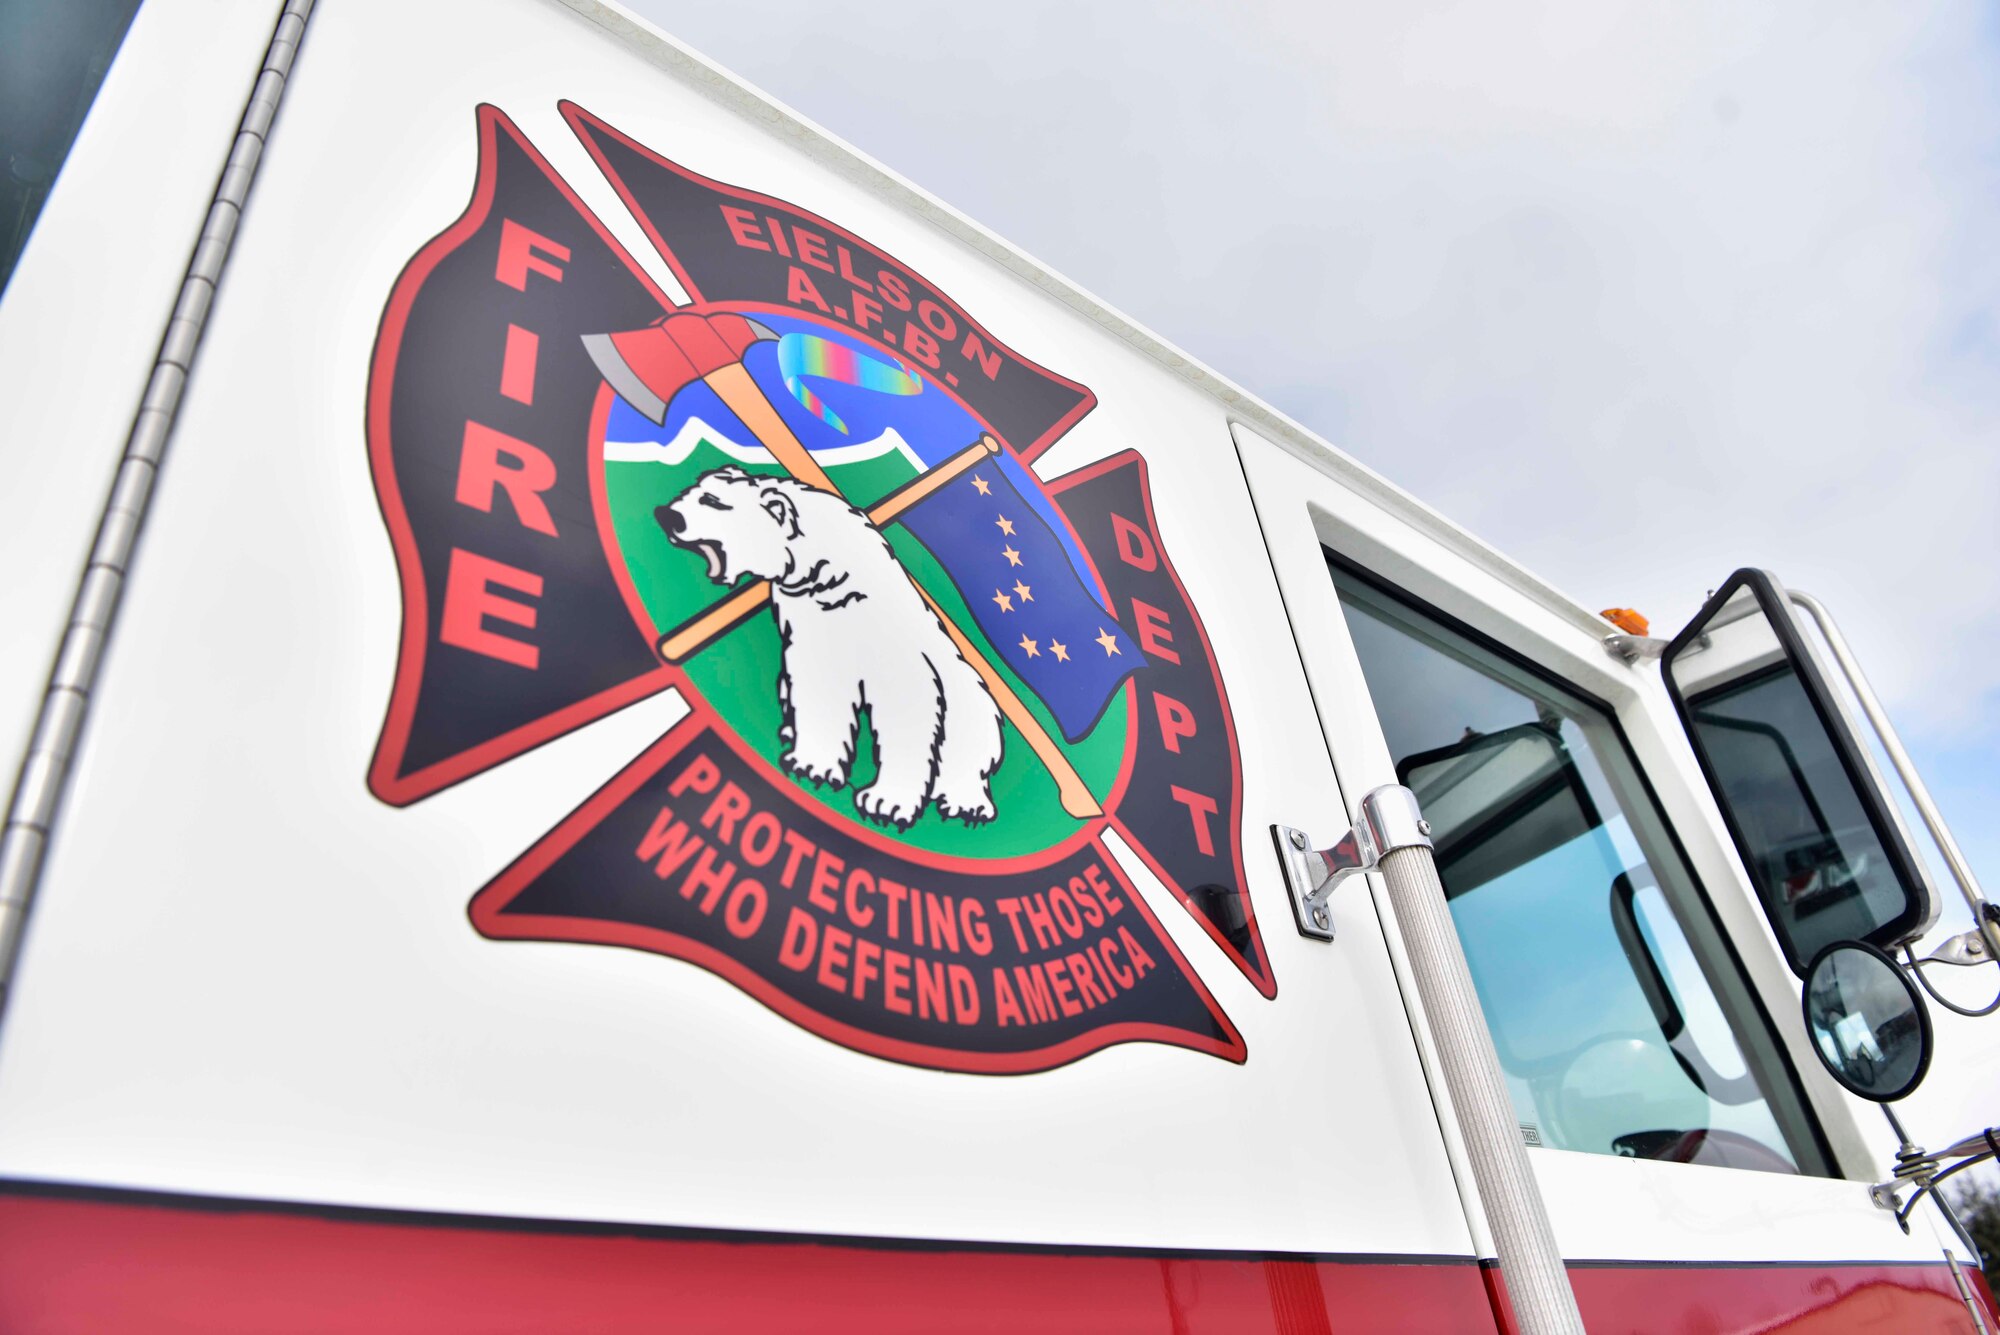 The 354th Civil Engineer Squadron fire department emblem on the side of a firetruck on Eielson Air Force Base, Alaska, March 26, 2020. Eielson firefighters respond to different types of calls including fire and medical emergencies, accidents involving hazardous materials and incidents on the flight line. (U.S. Air Force photo by Senior Airman Beaux Hebert)